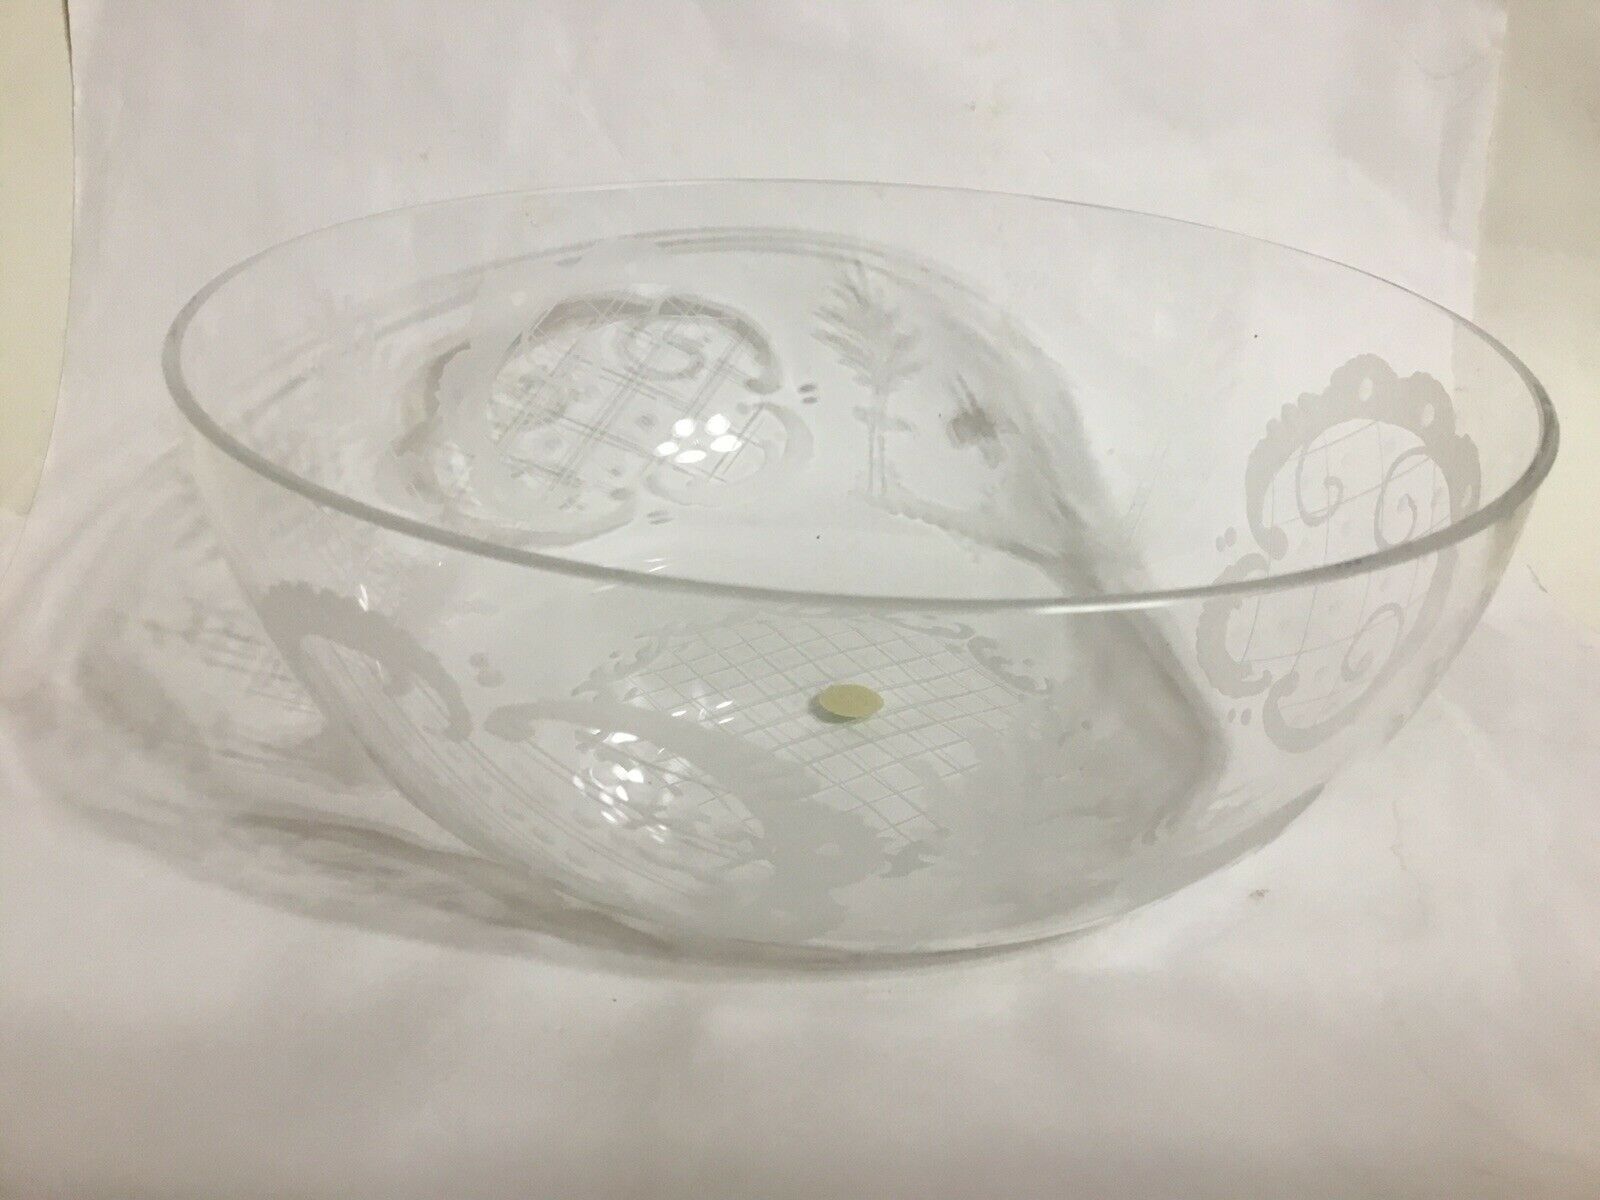 Tiffany Etched Bowl, Purchased 1969 Made In West Germany New